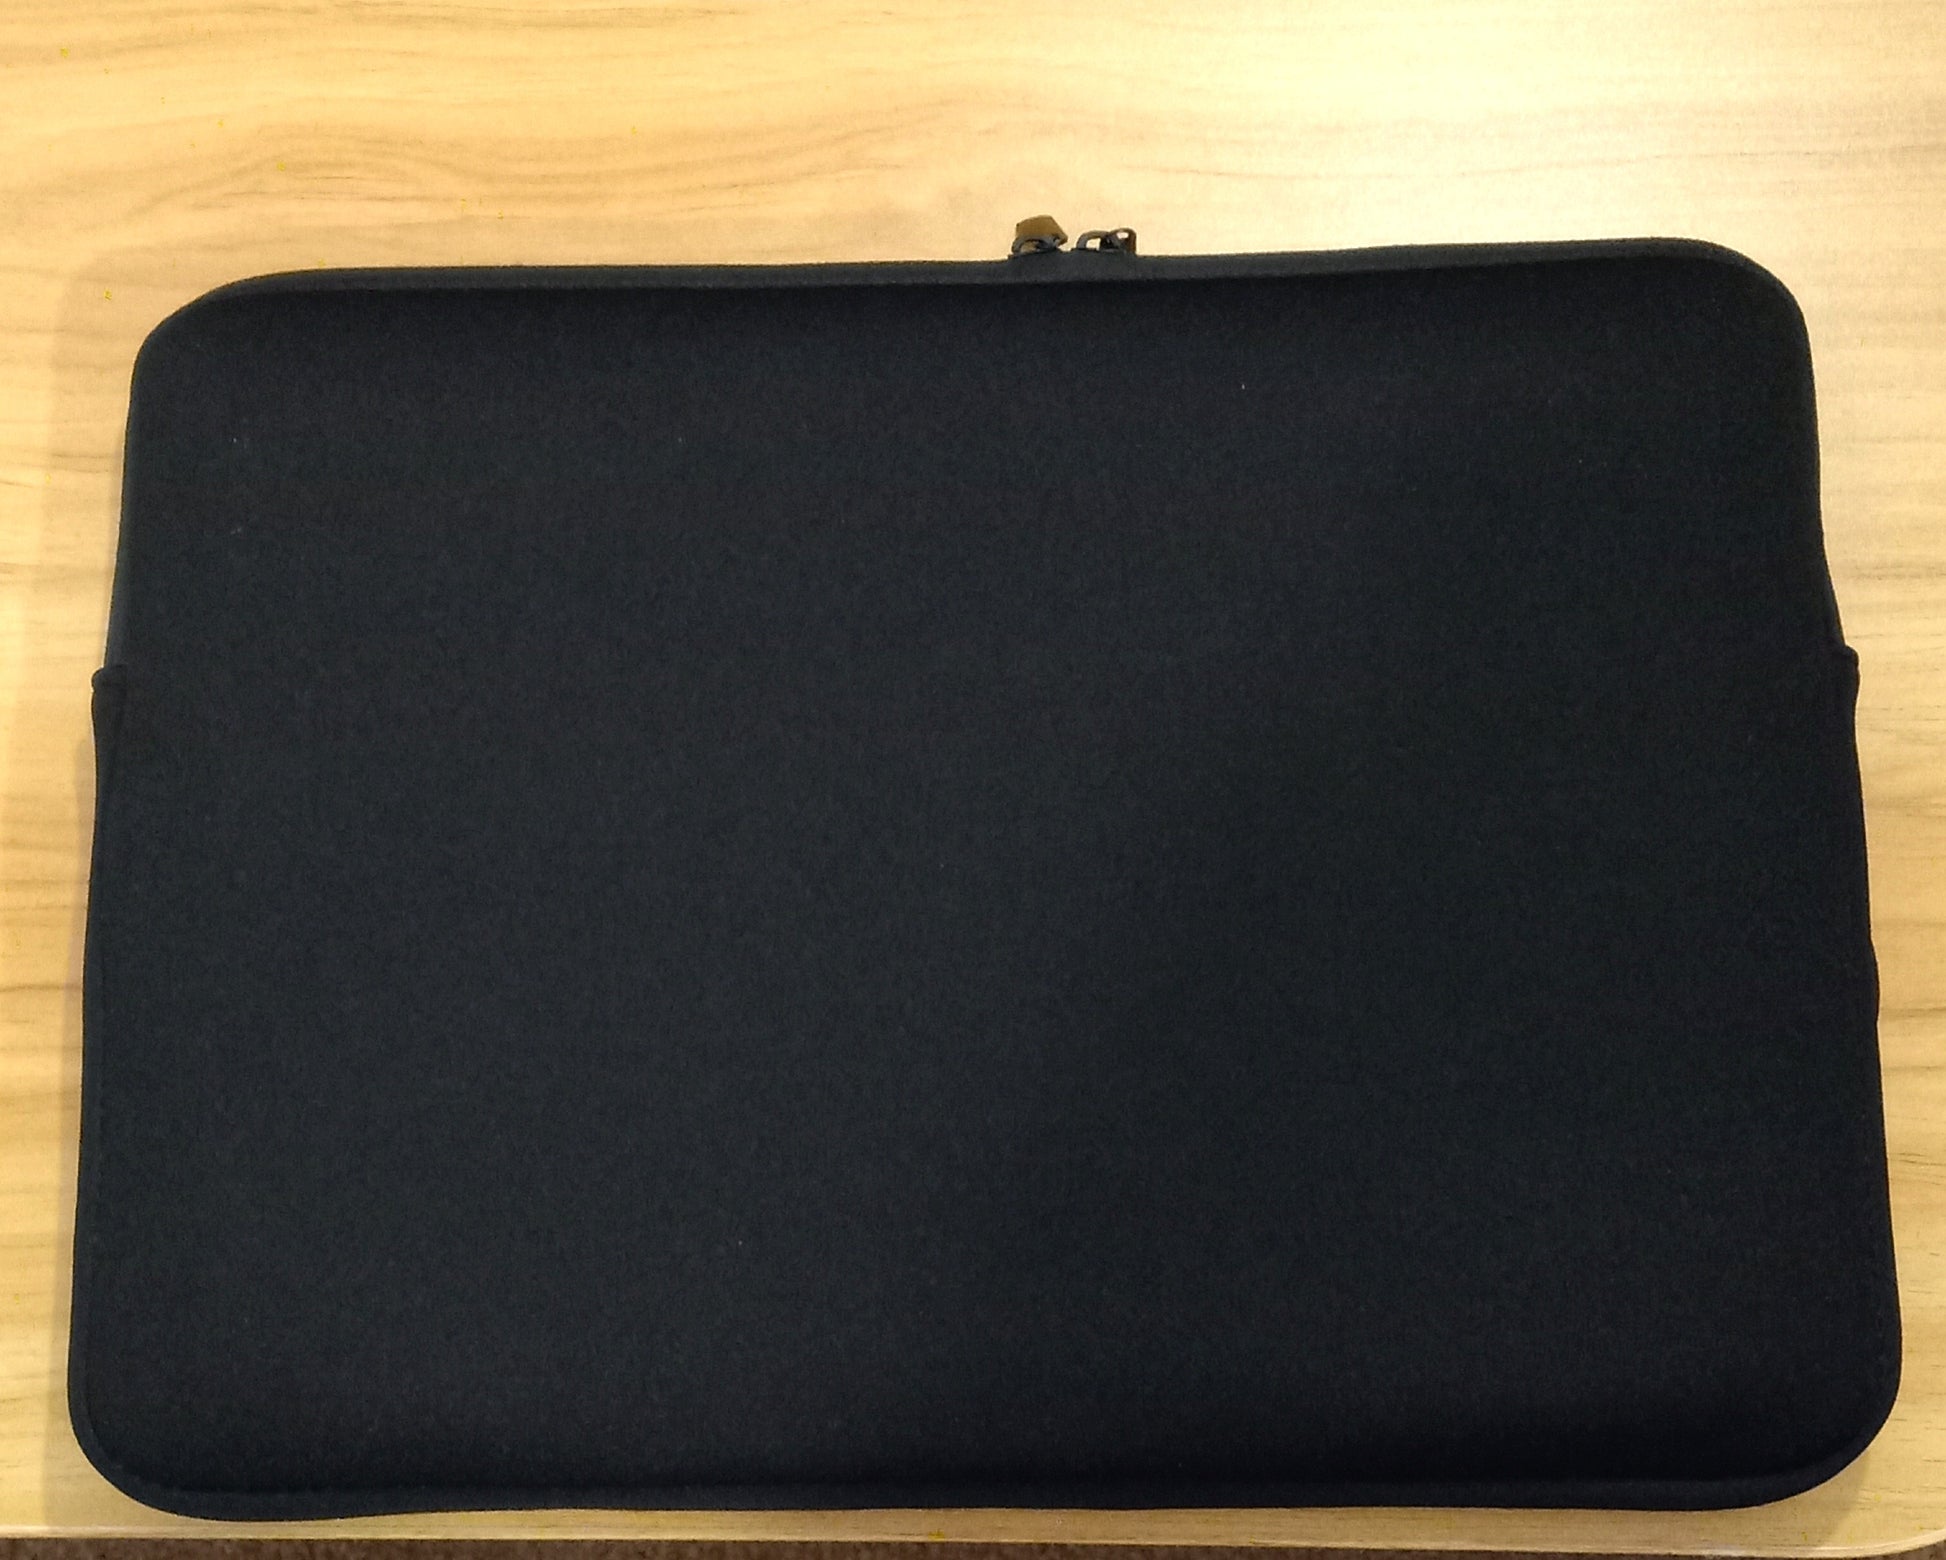 15 inch, large laptop protector sleeve case for your computer with black back. Fits 15 inch large Dell laptop. JAMILLIAH'S WISDOM IS TIMELESS SHOP - wisdomistimeless.com. 